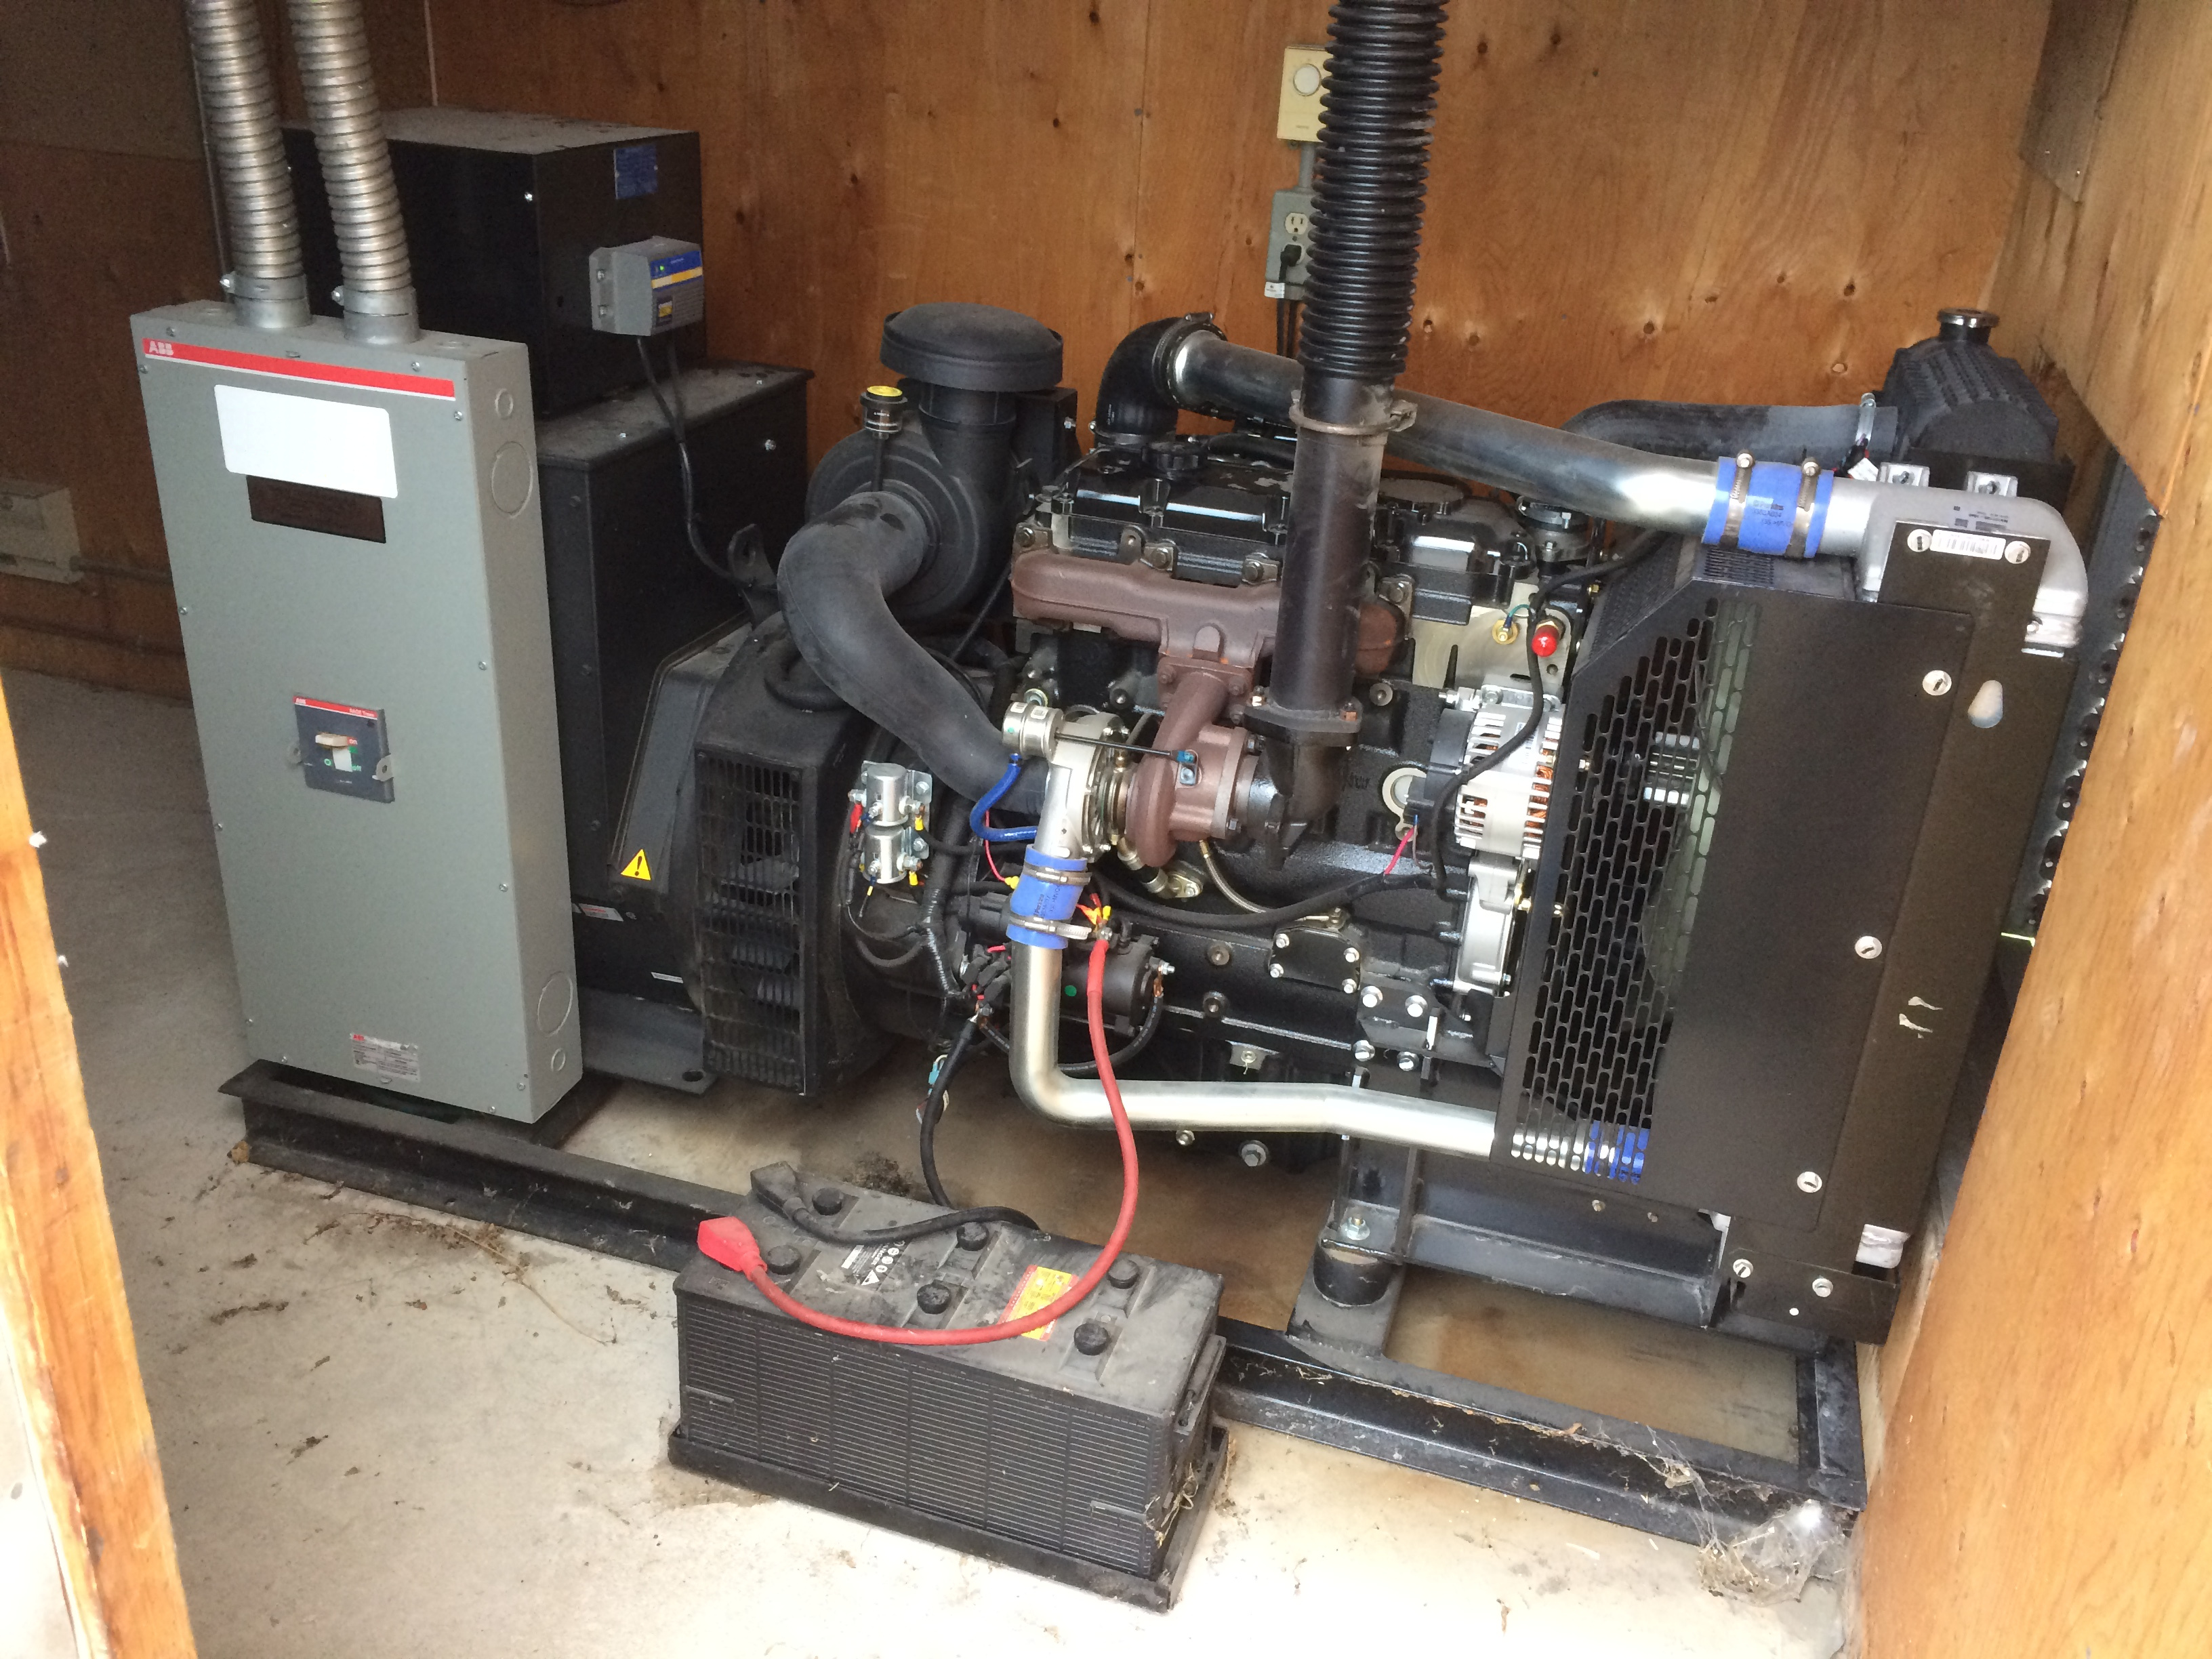 this photo shows a self-contained engine-driven generator, permanently installed inside a shed.